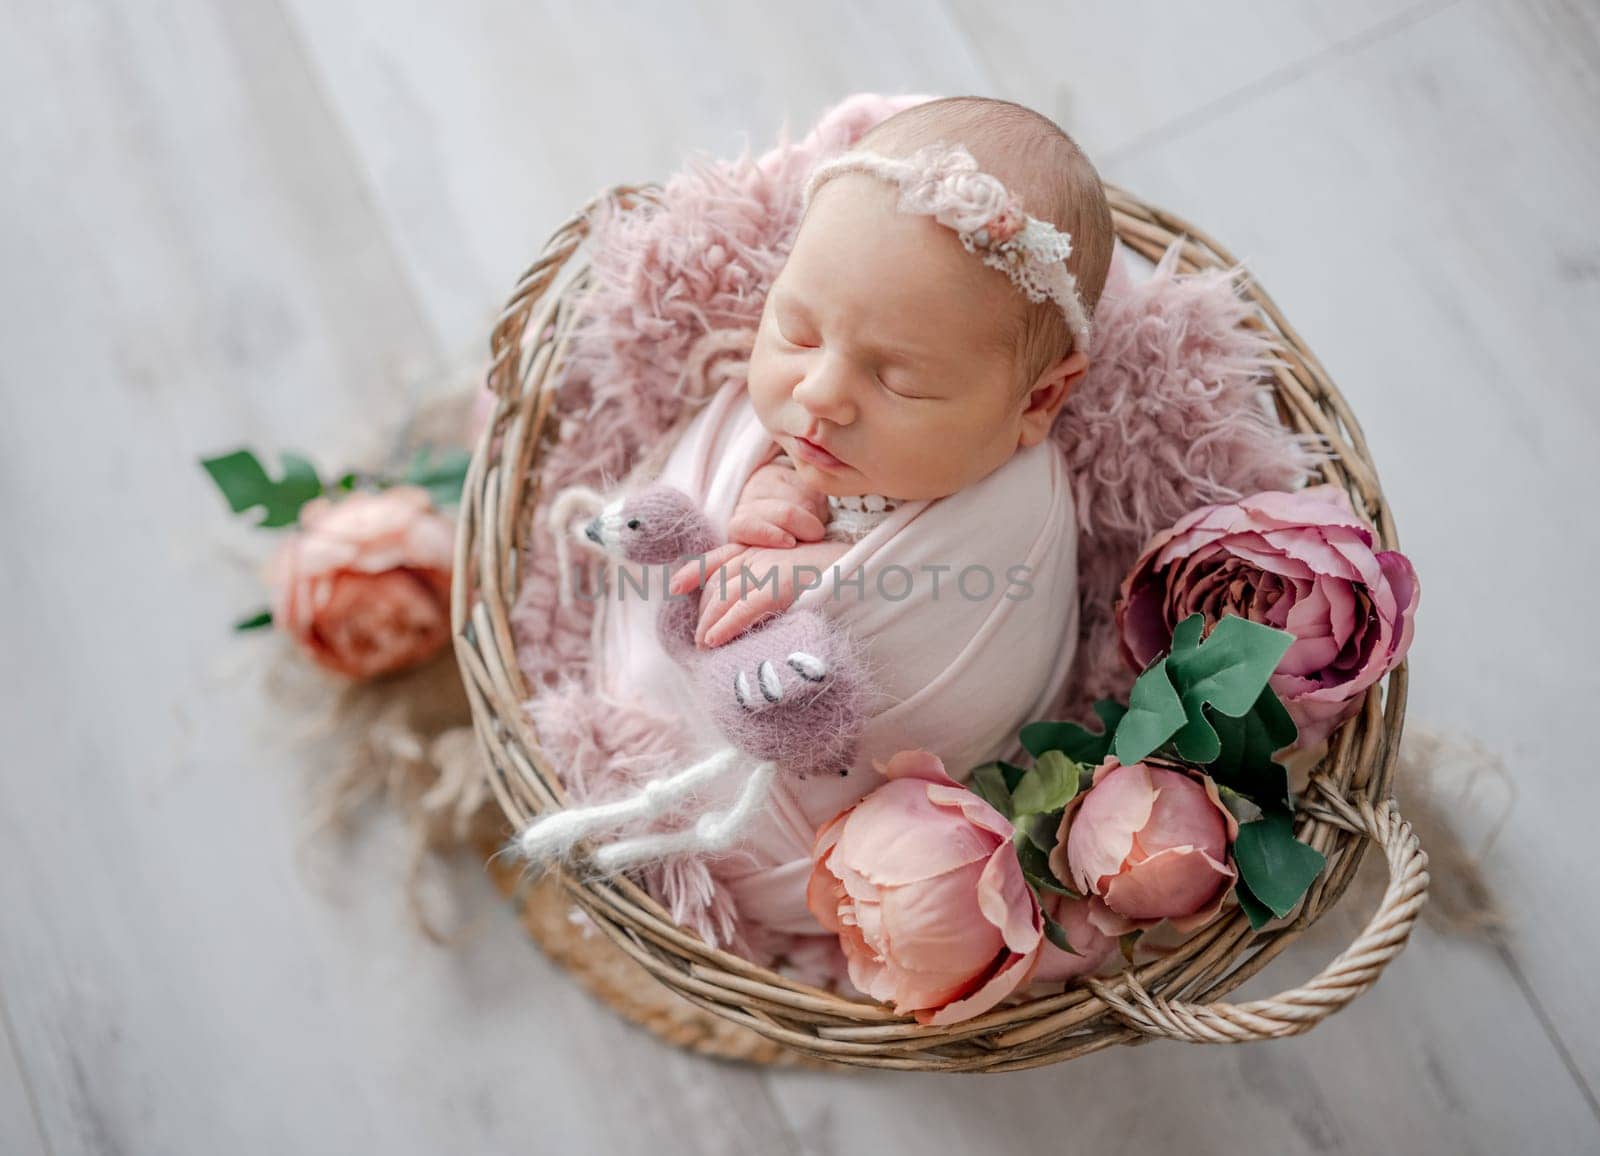 Newborn Girl In Pink Outfit With Toy Cat Sleeps In Heart-Shaped Wooden Bowl by tan4ikk1